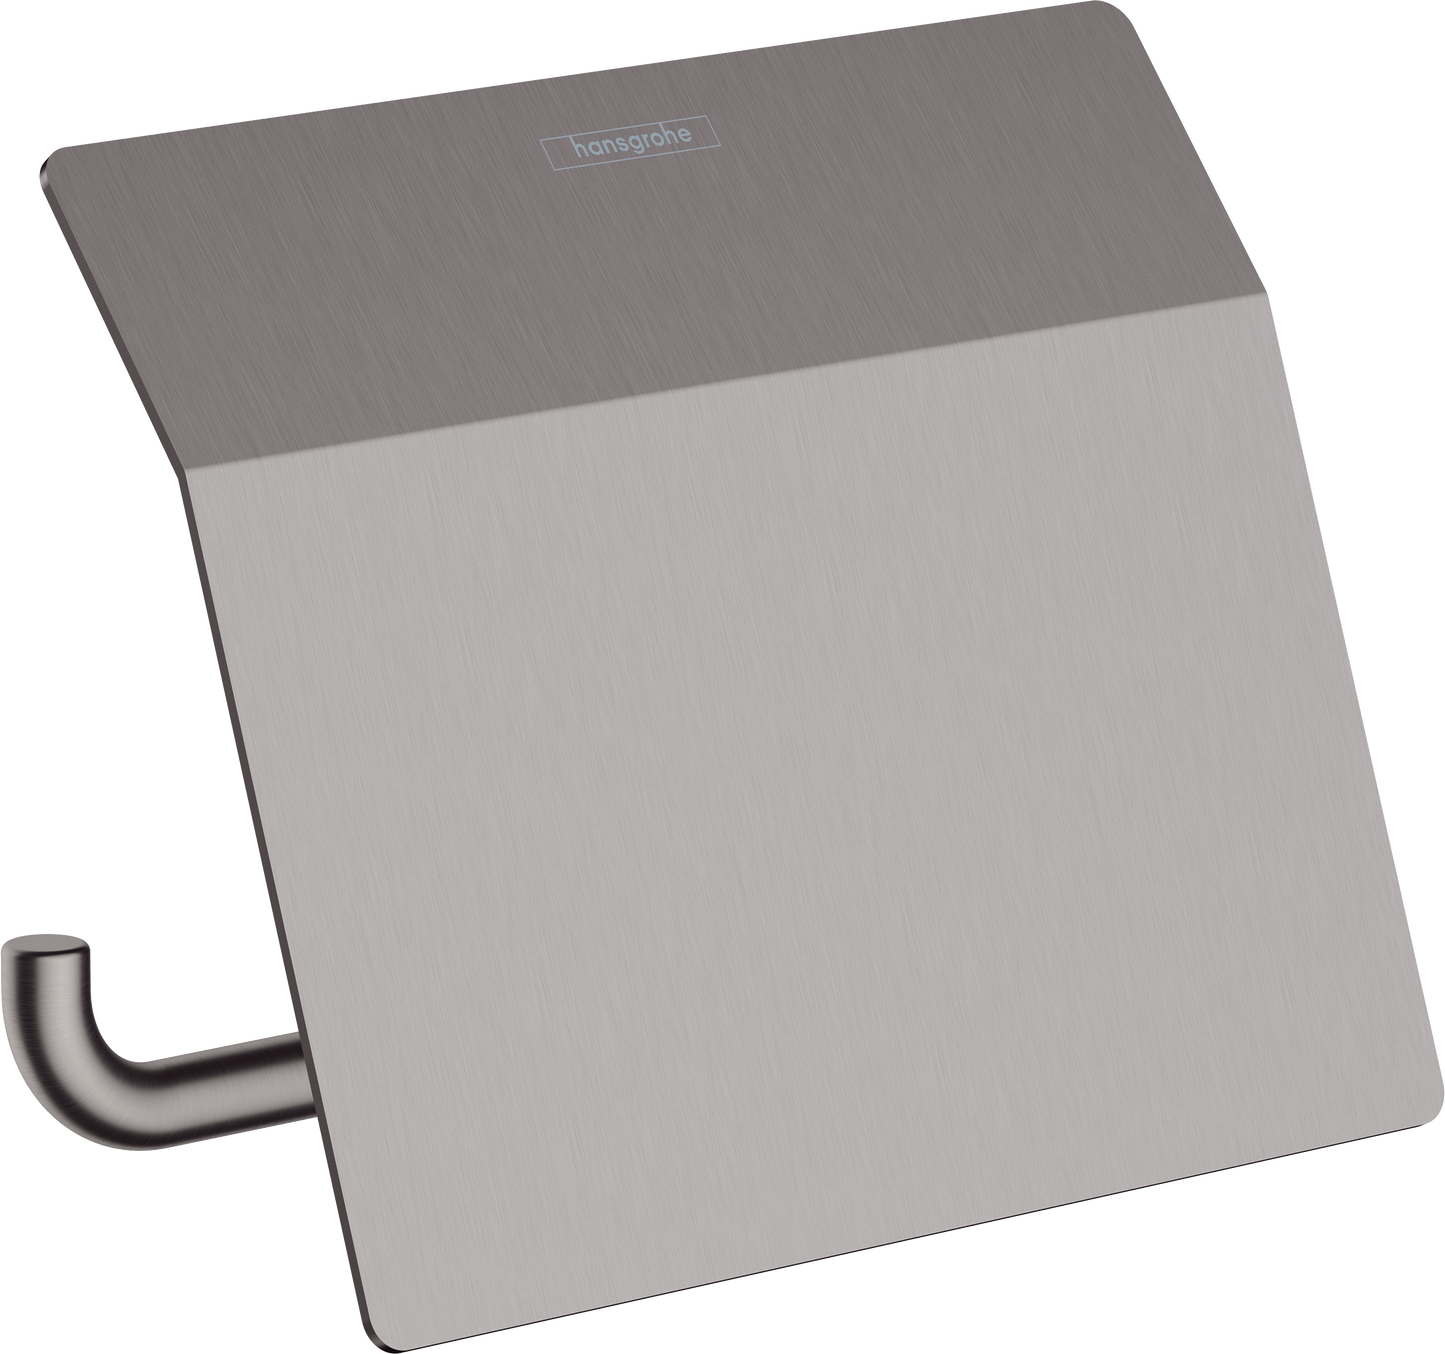 AddStoris Toilet paper holder with cover